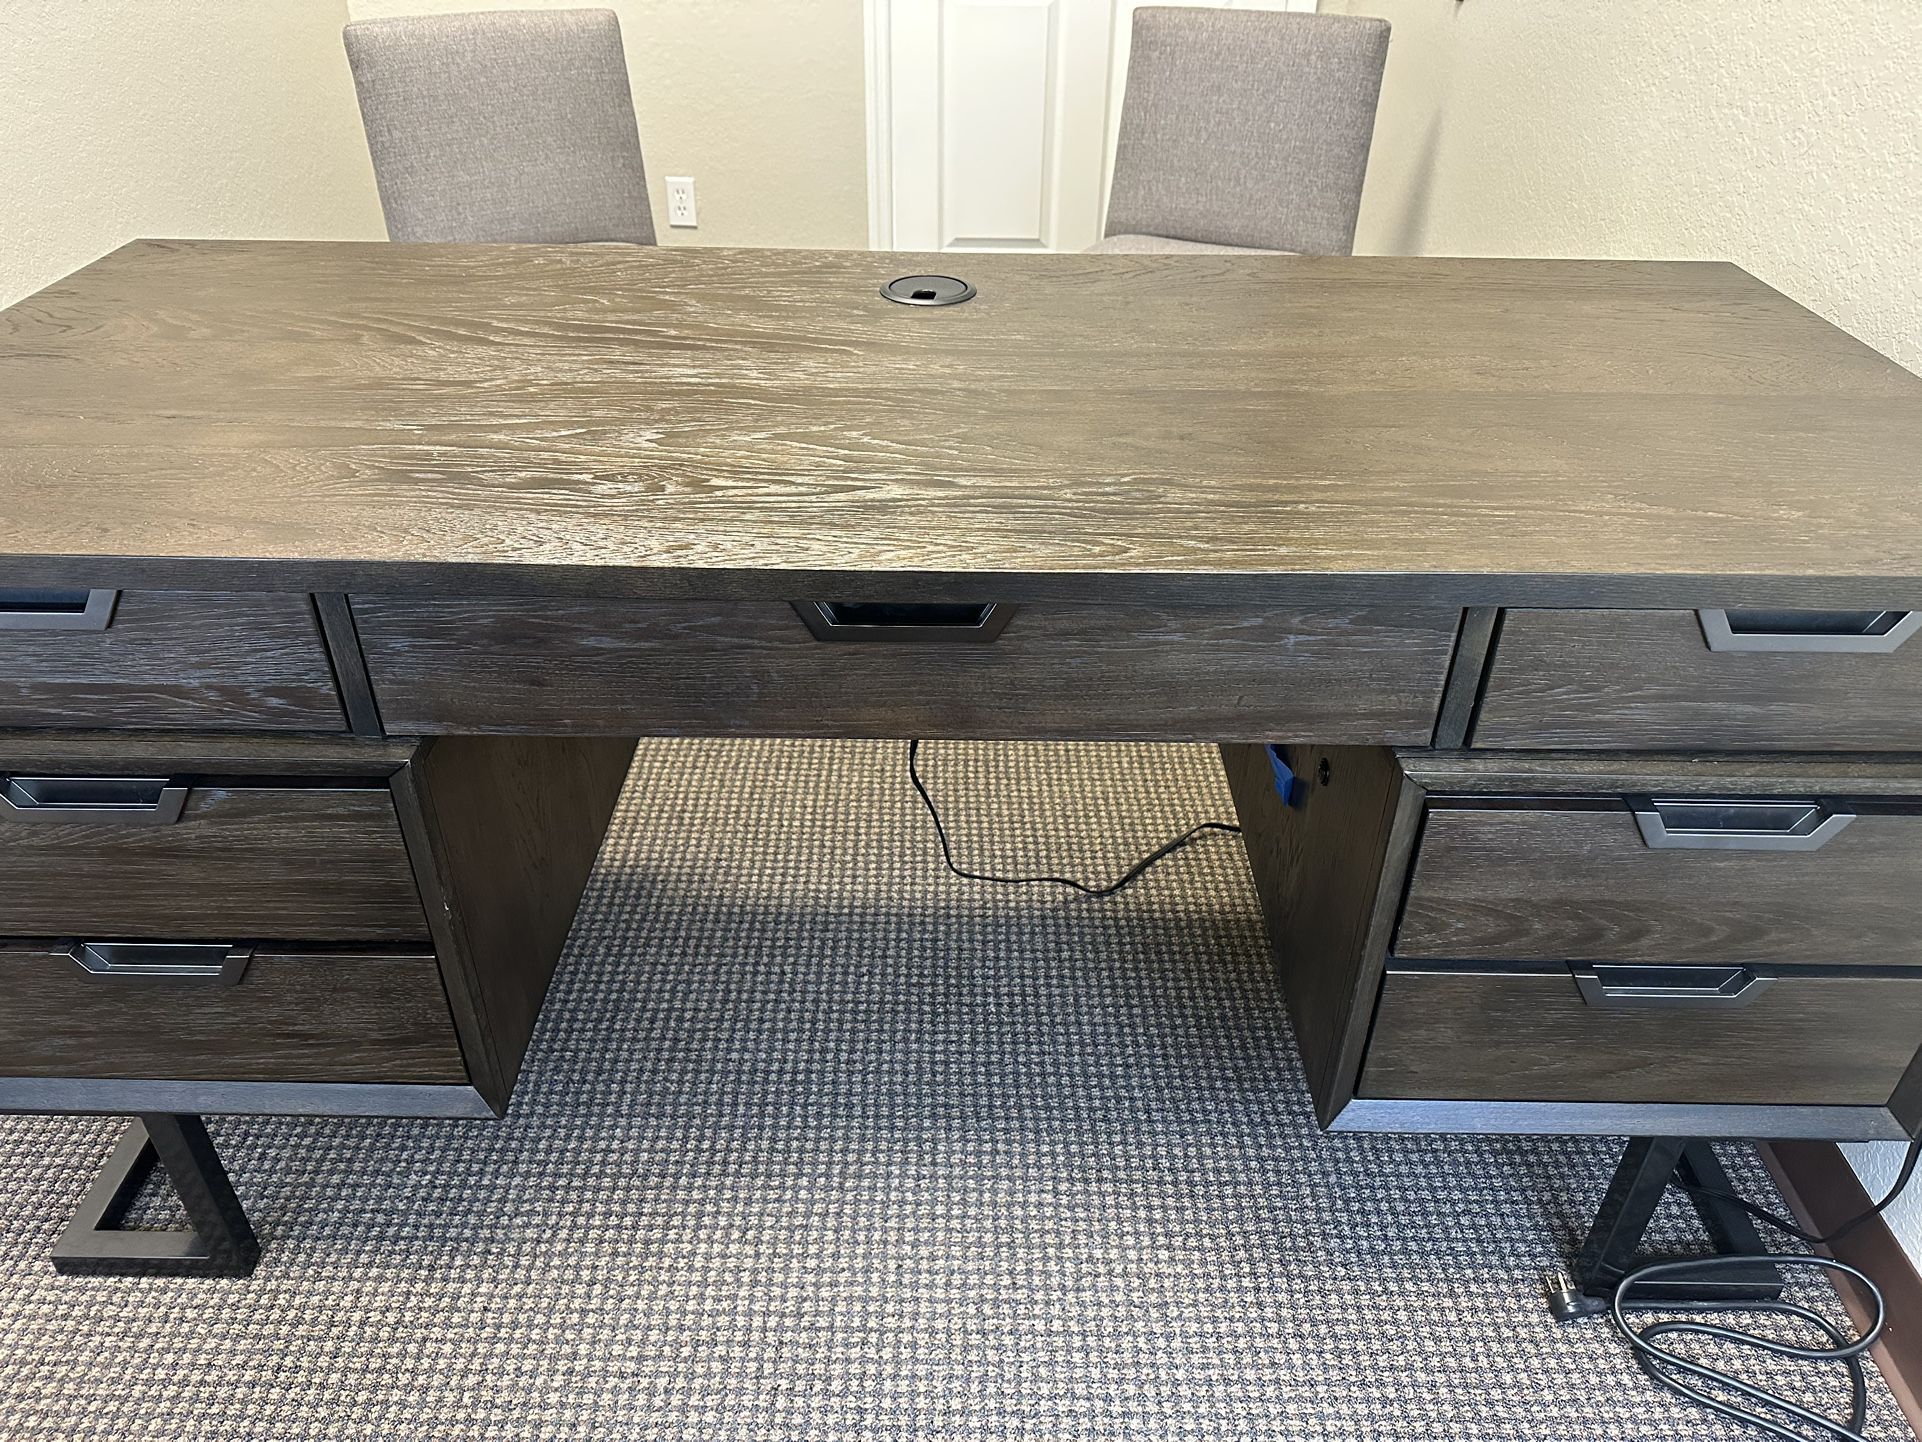 BEAUTIFUL HIGH END FURNITURE OFFICE / HOUSE   66" EXECUTIVE DESK   The Price Is For Each / We Have 4 Price Is Flexible To Negotiations 